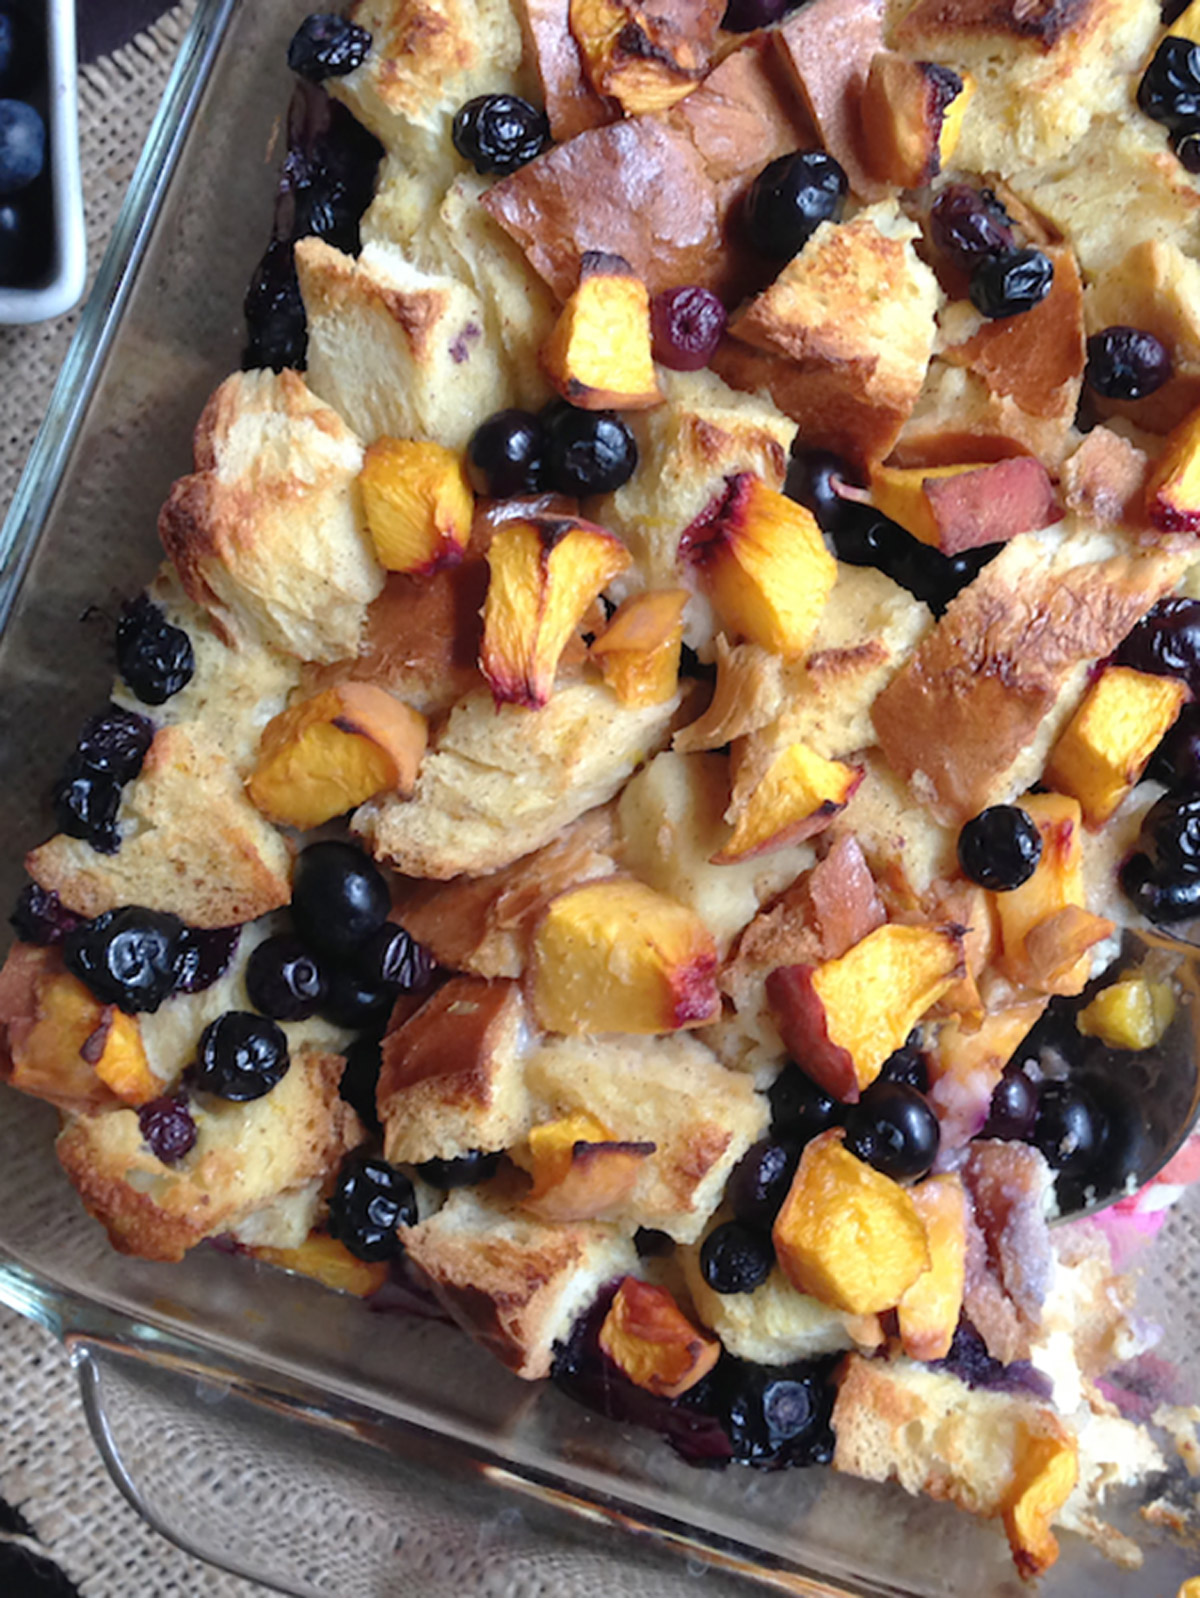 Baked challah bread pudding in glass baking dish.